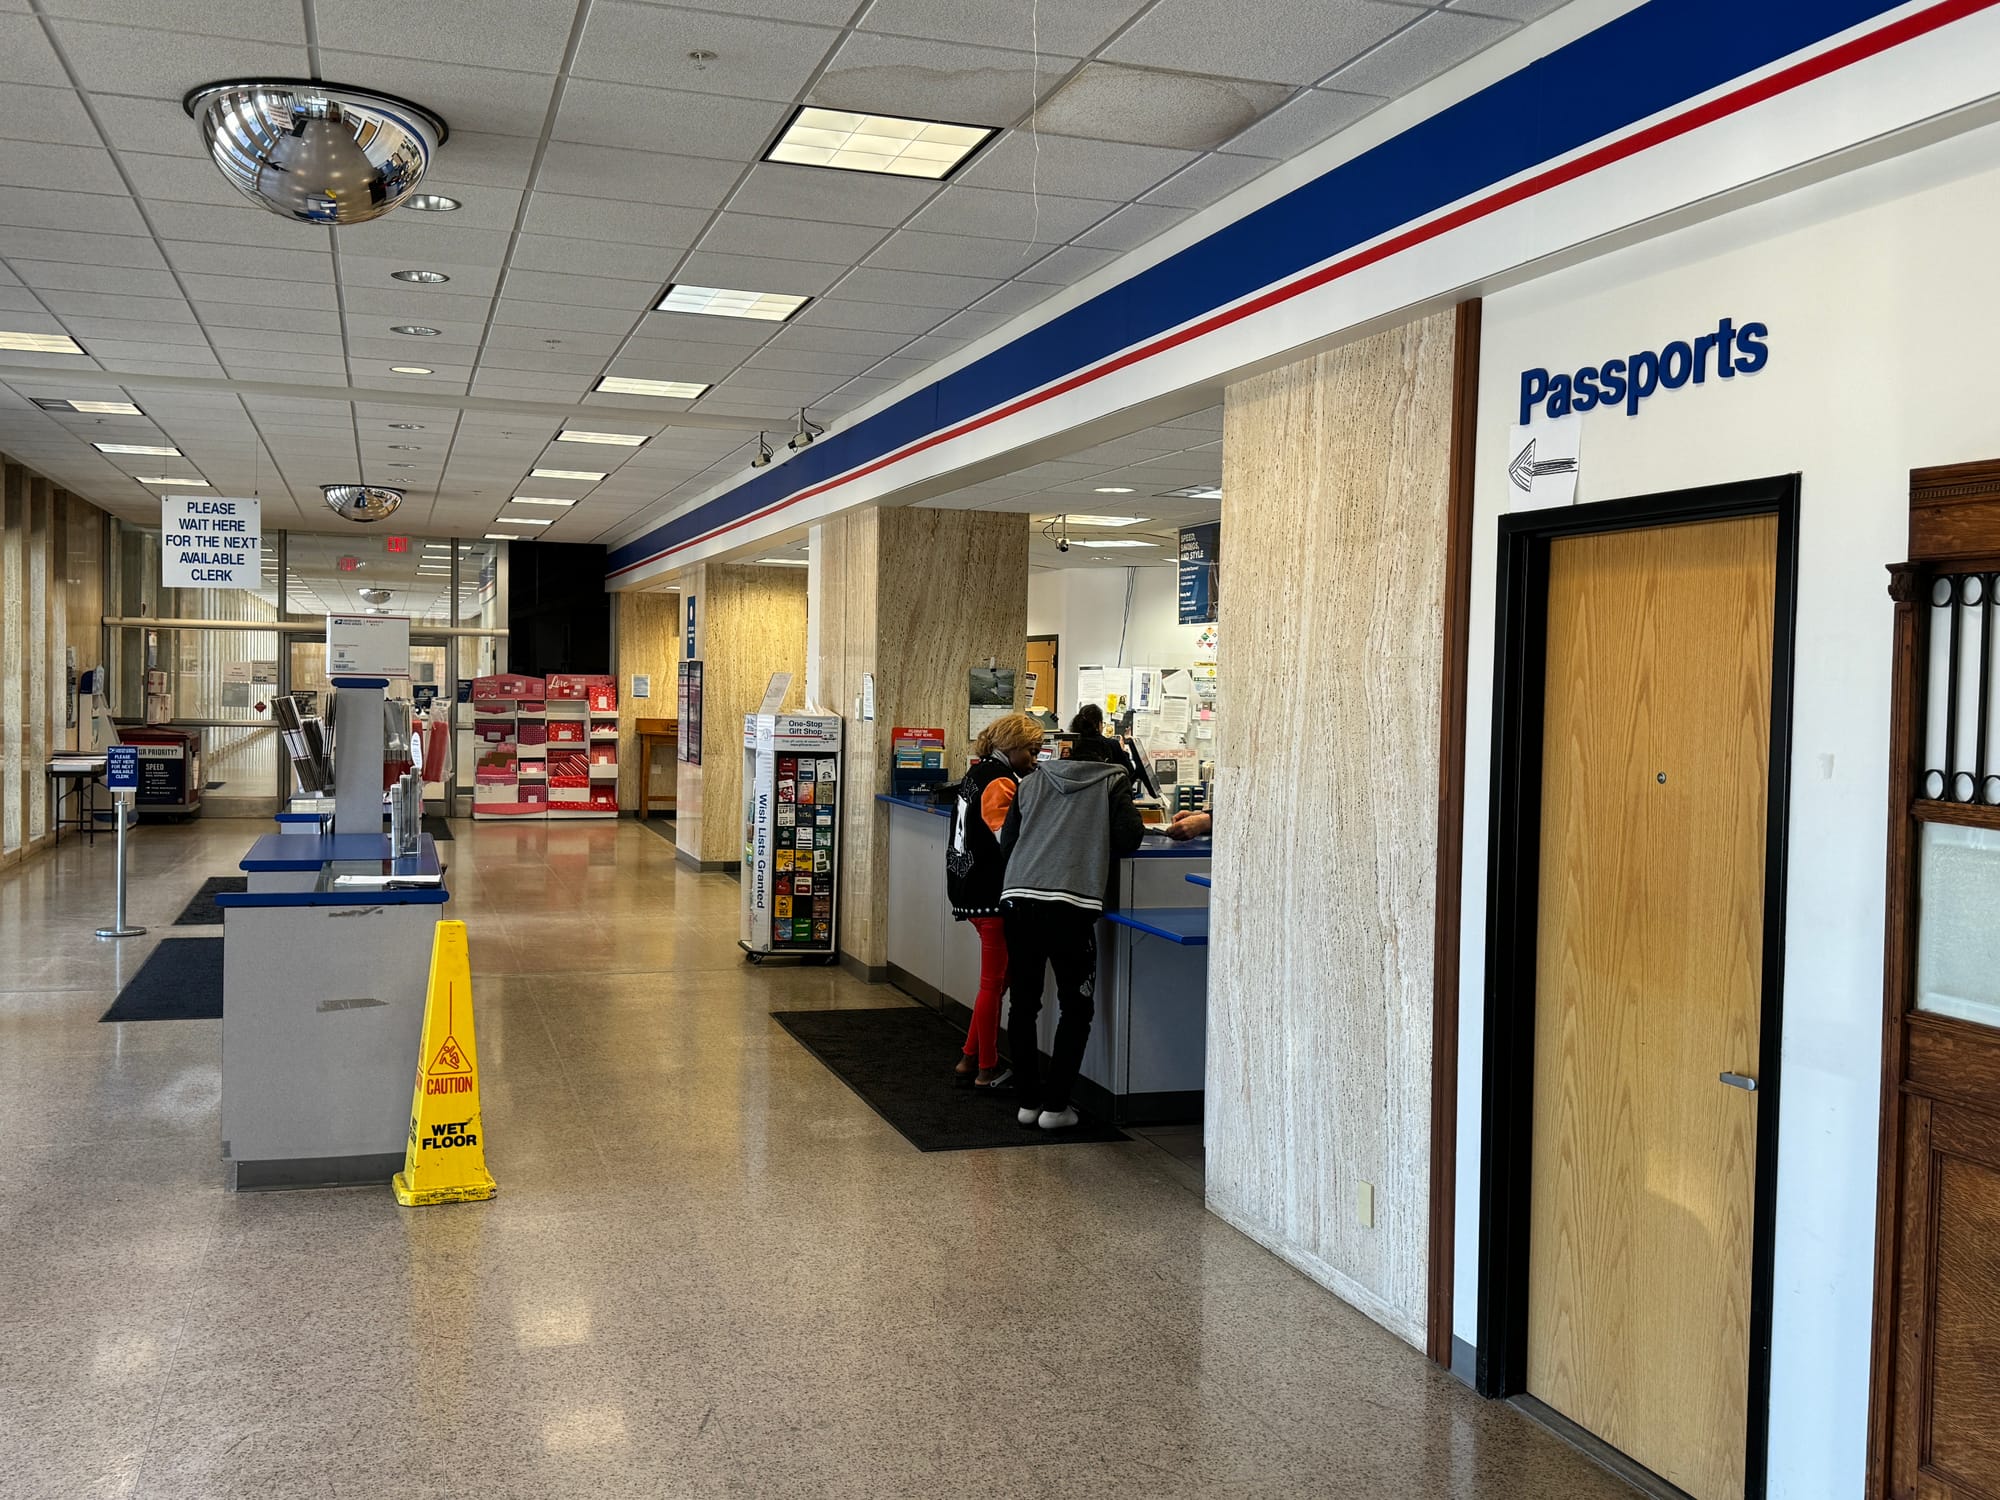 The interior of the US Postal Service offices in Sioux Falls, South Dakota.